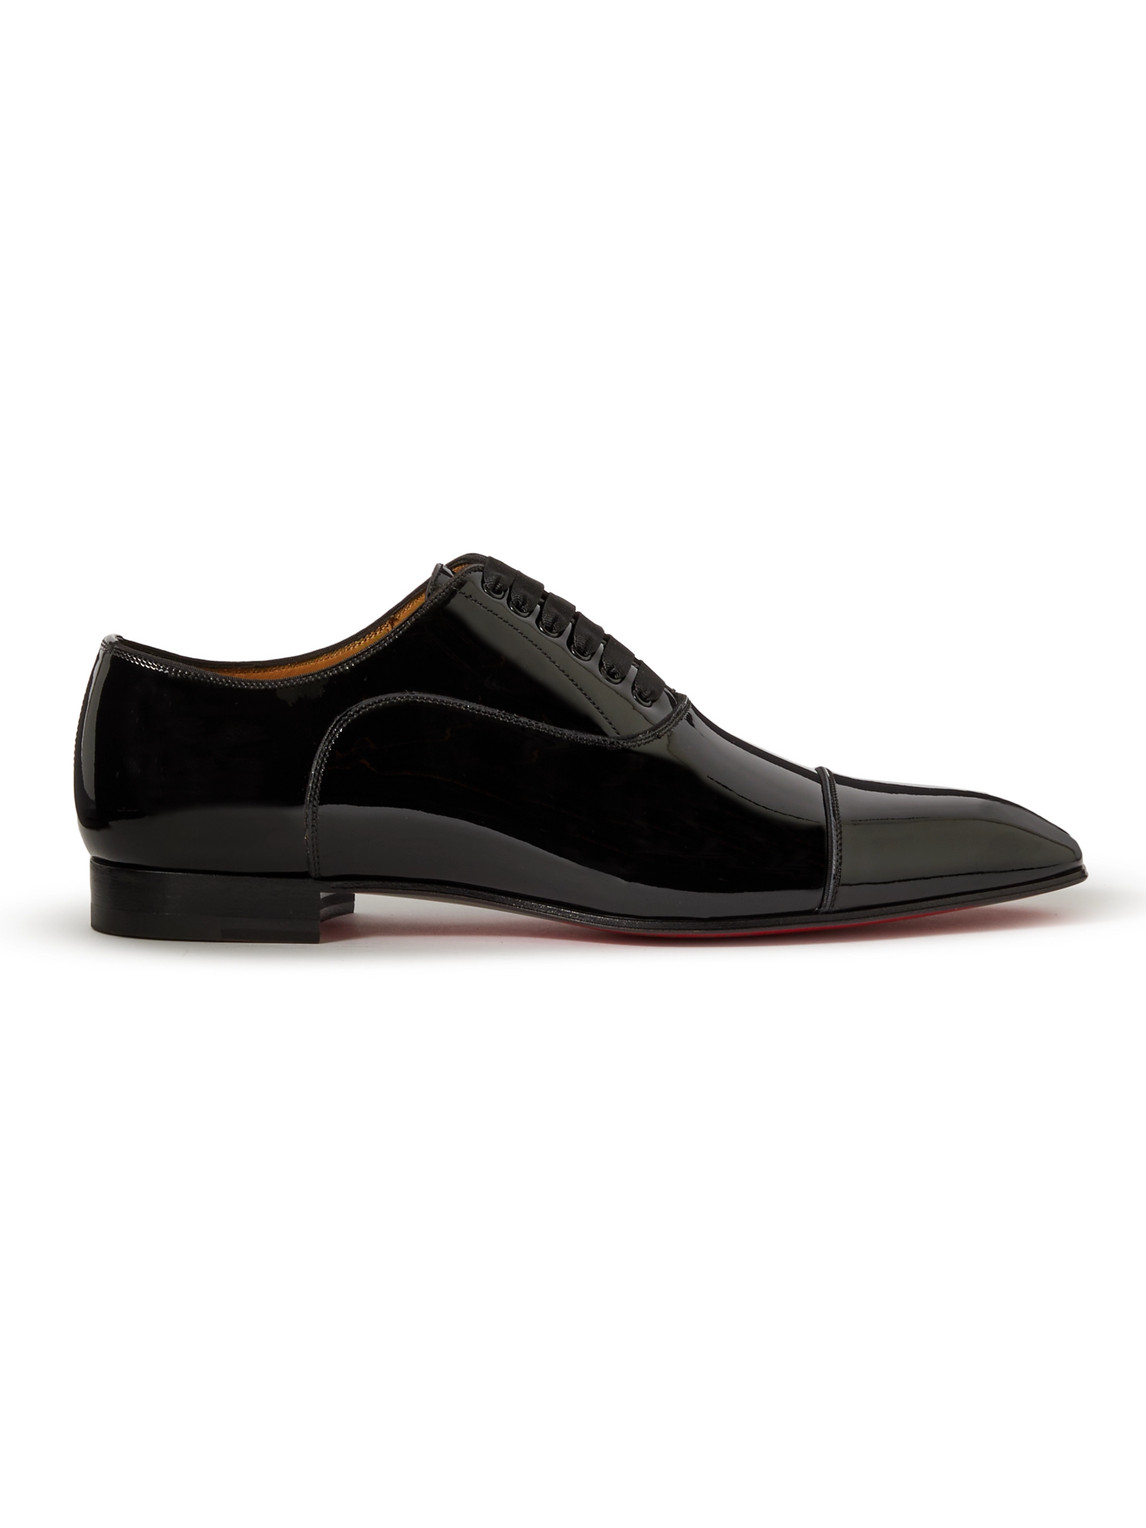 Greggo Patent-Leather Oxford Shoes